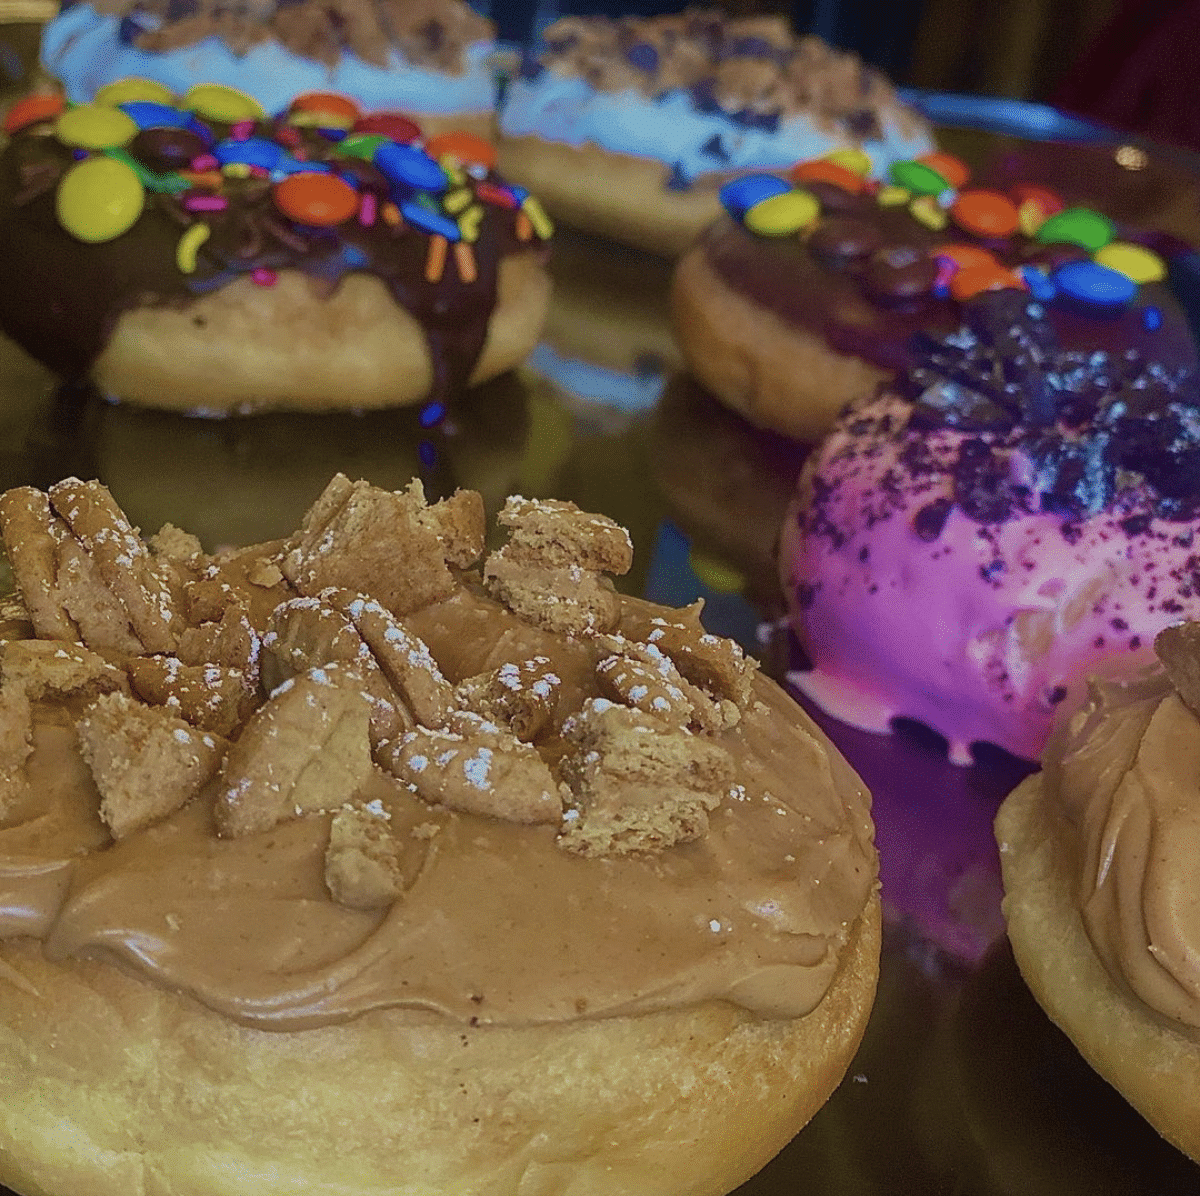 Assorted donuts with different flavors and toppings